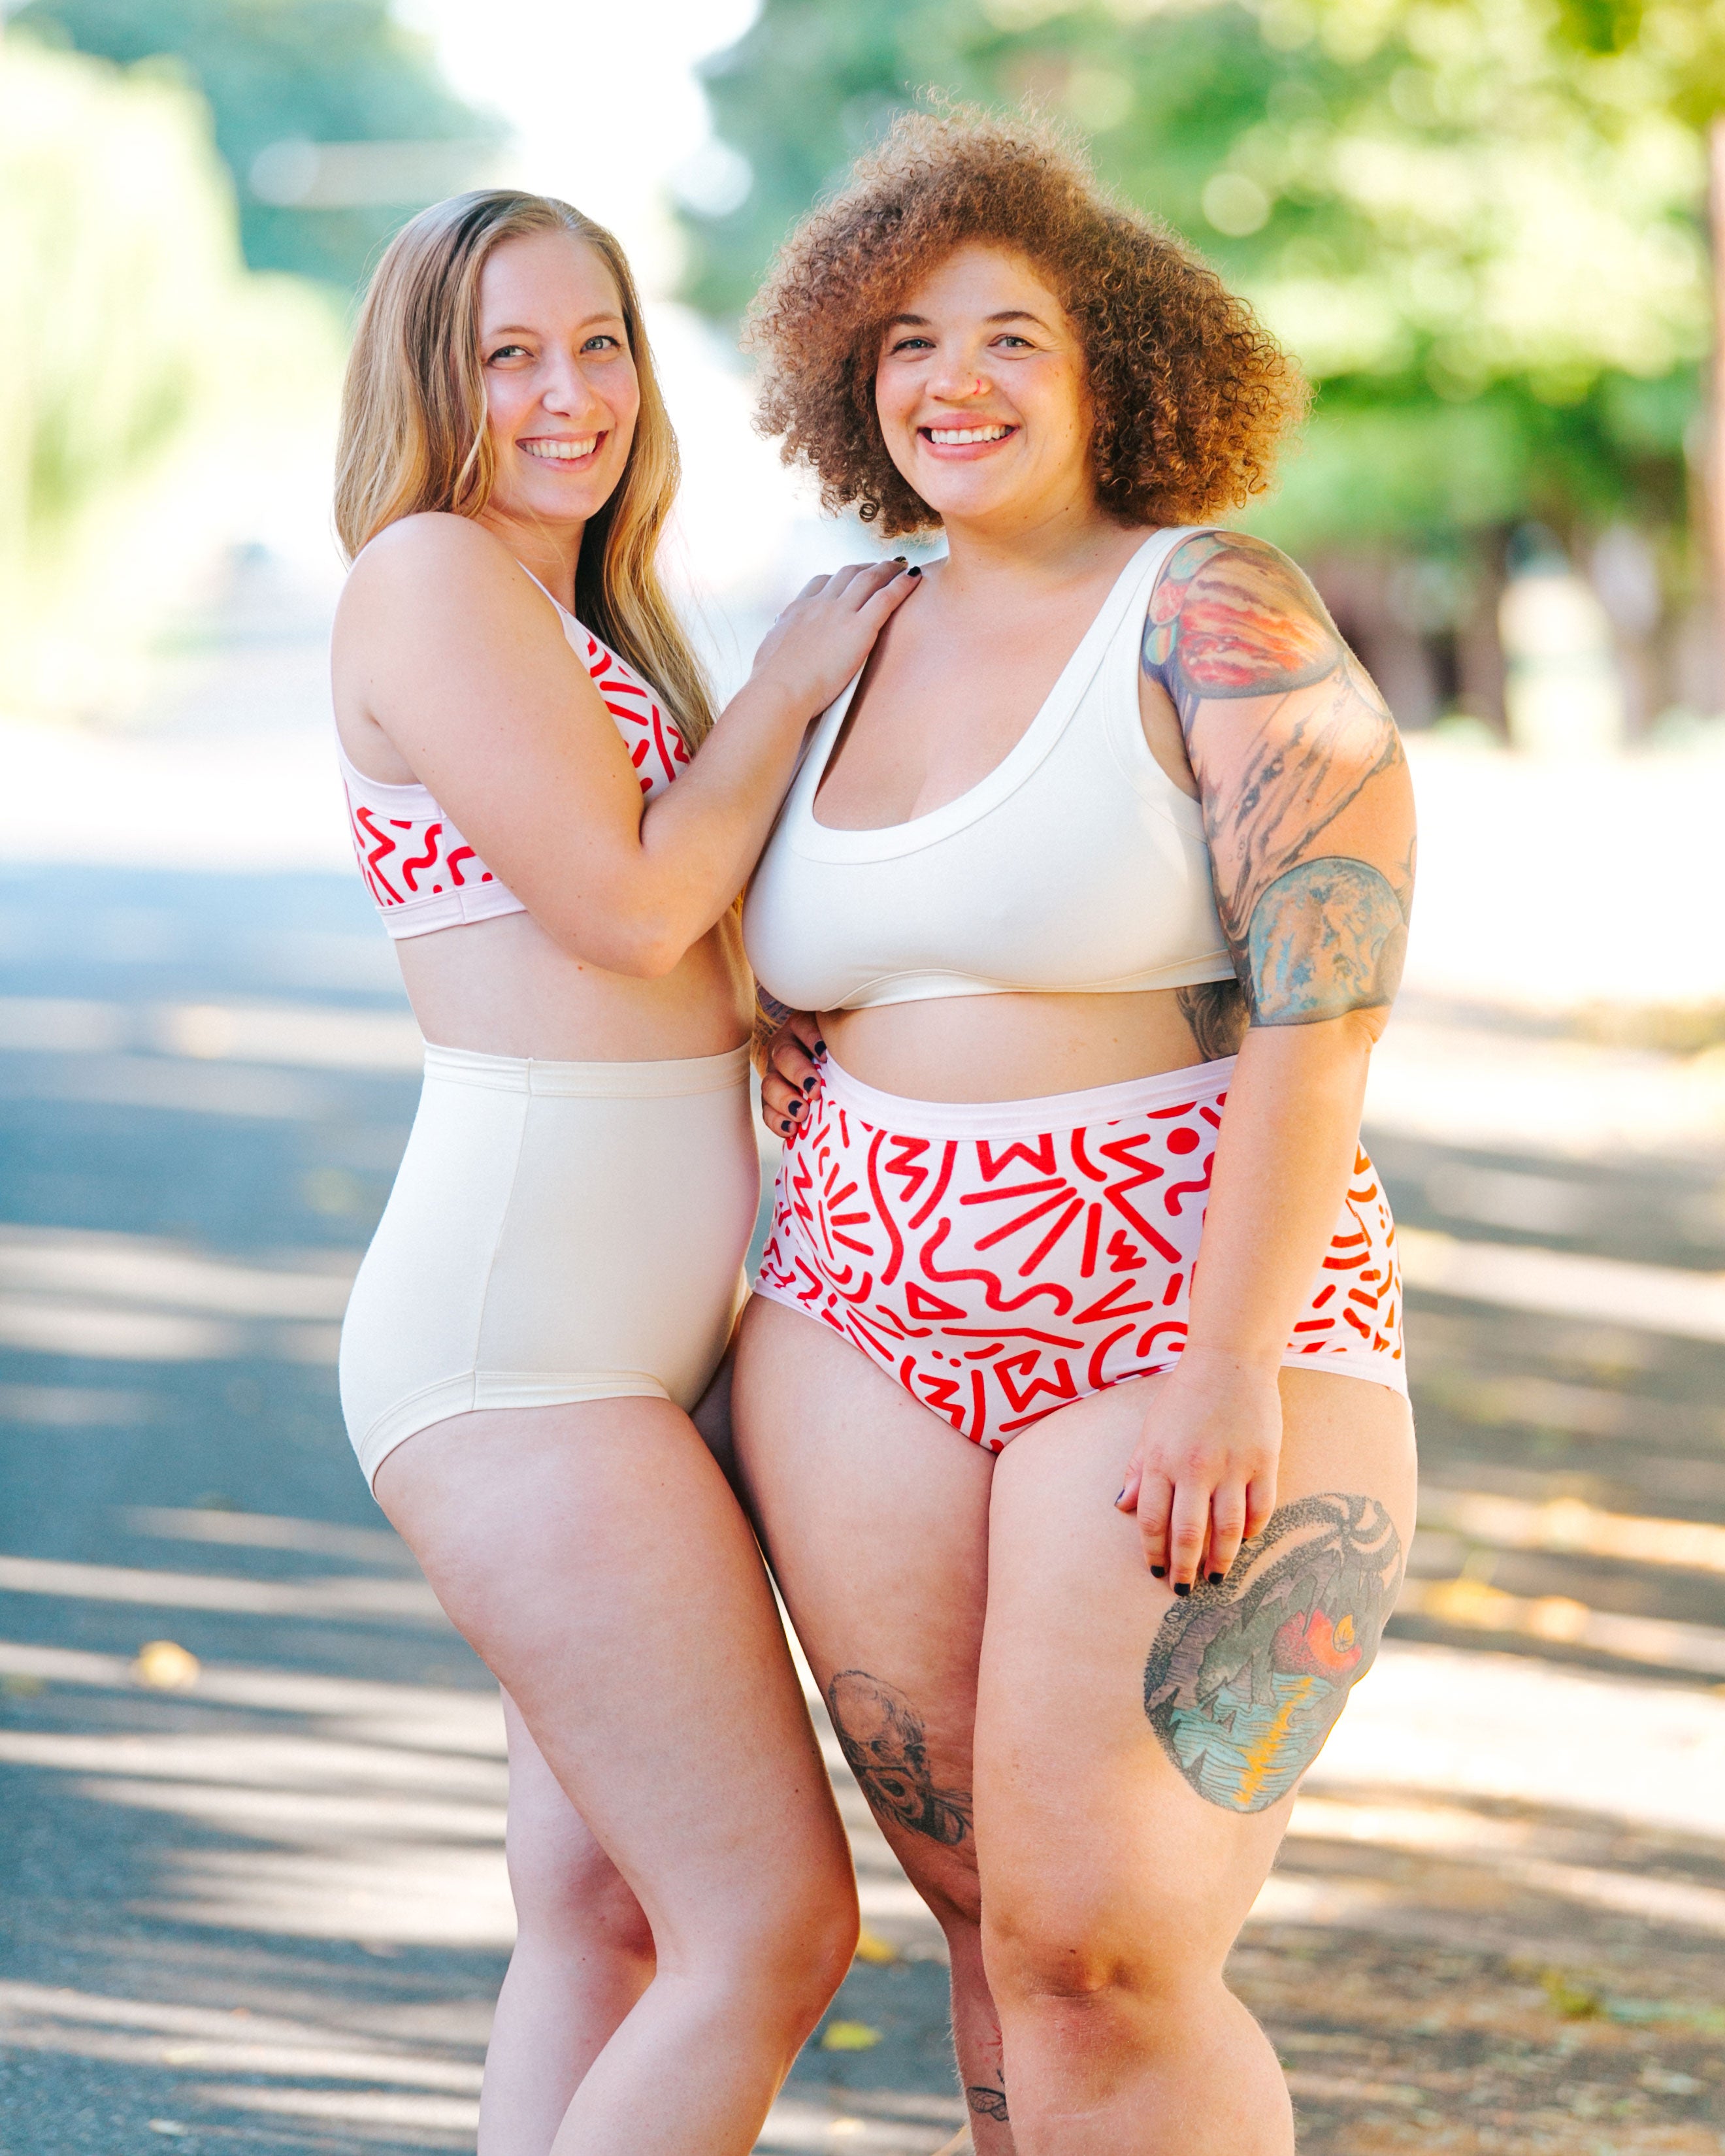 Two models standing together wearing Thunderpants organic cotton Sky Rise style underwear and Bralettes in both plain Vanilla and Energy Vibes print: large red squiggles printed on Perfect Pink.